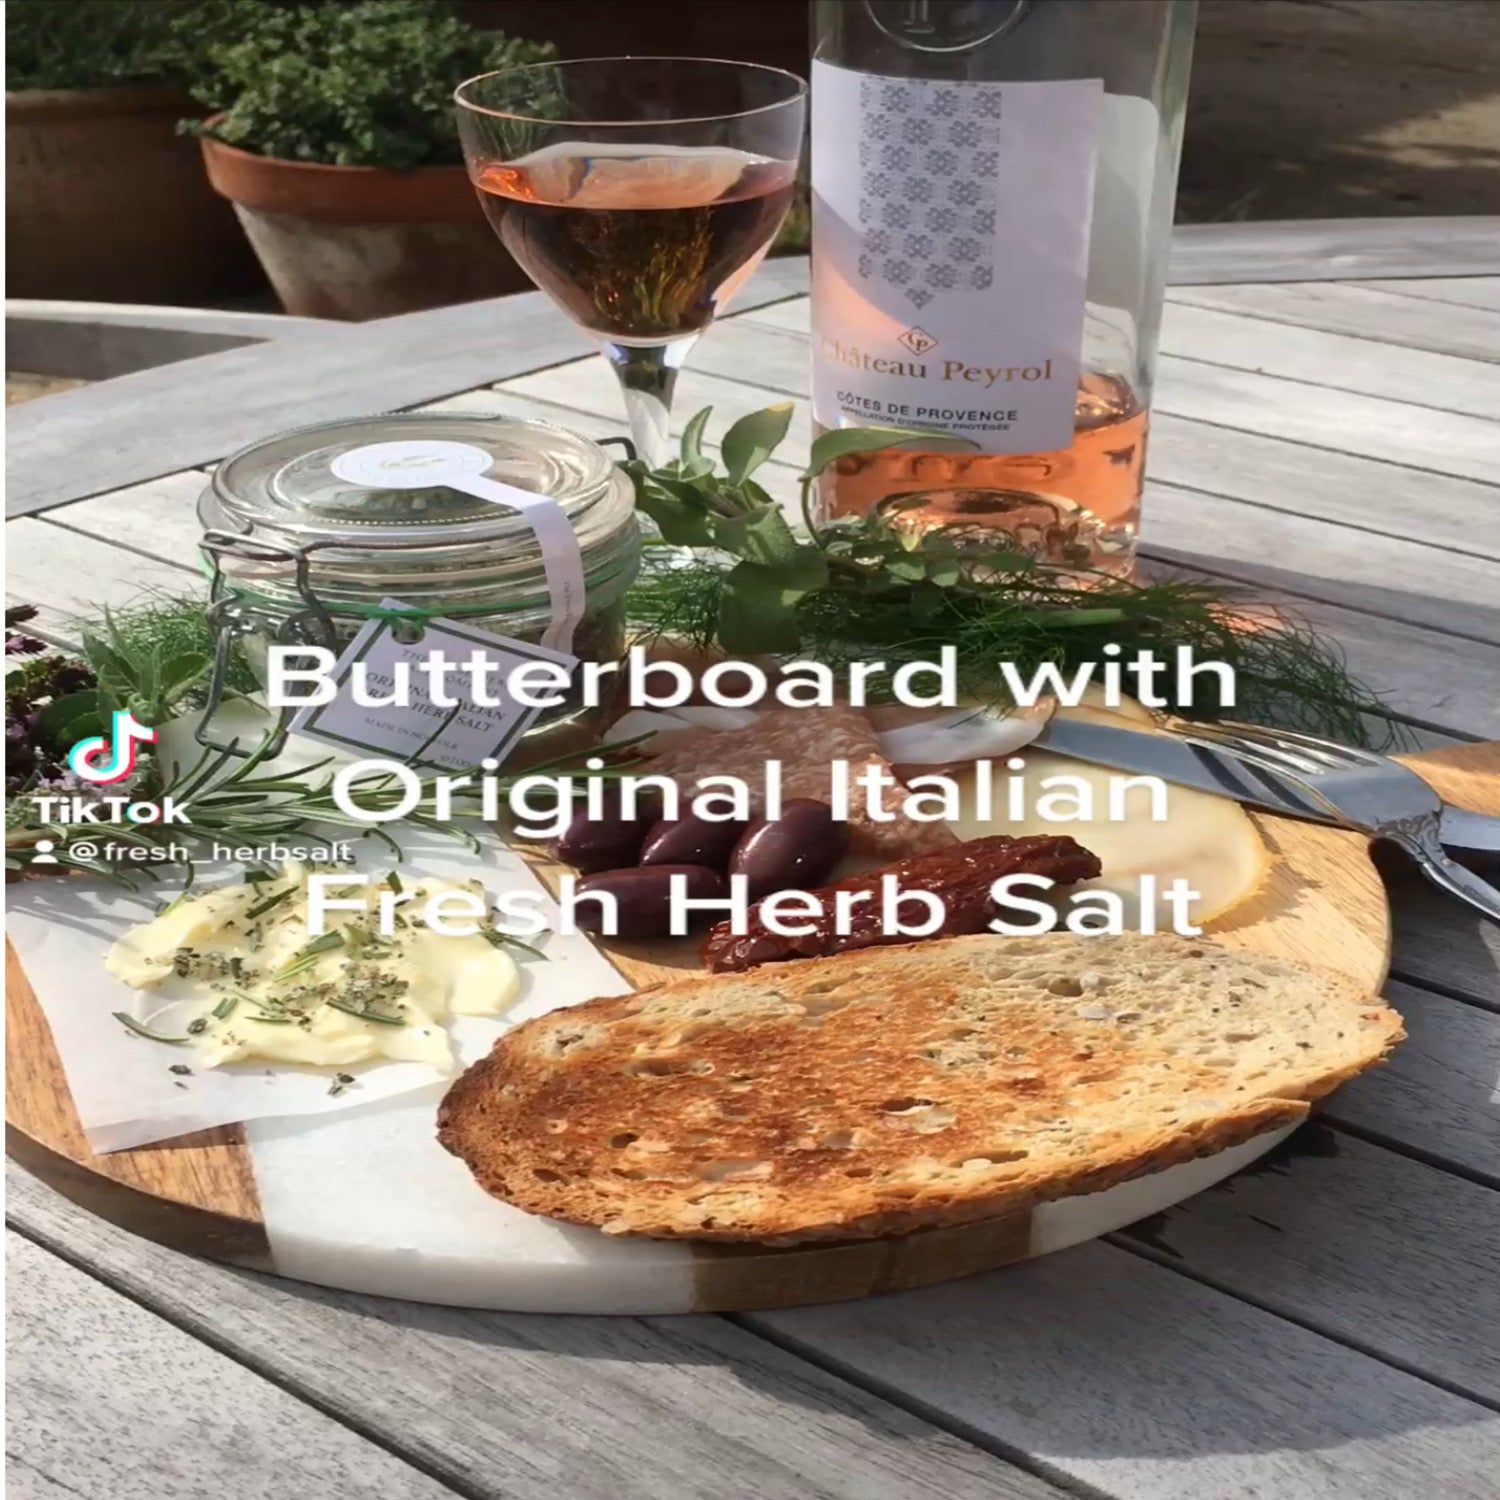 Butterboard with Original Italian Fresh Herb Salt - All the Trend now!